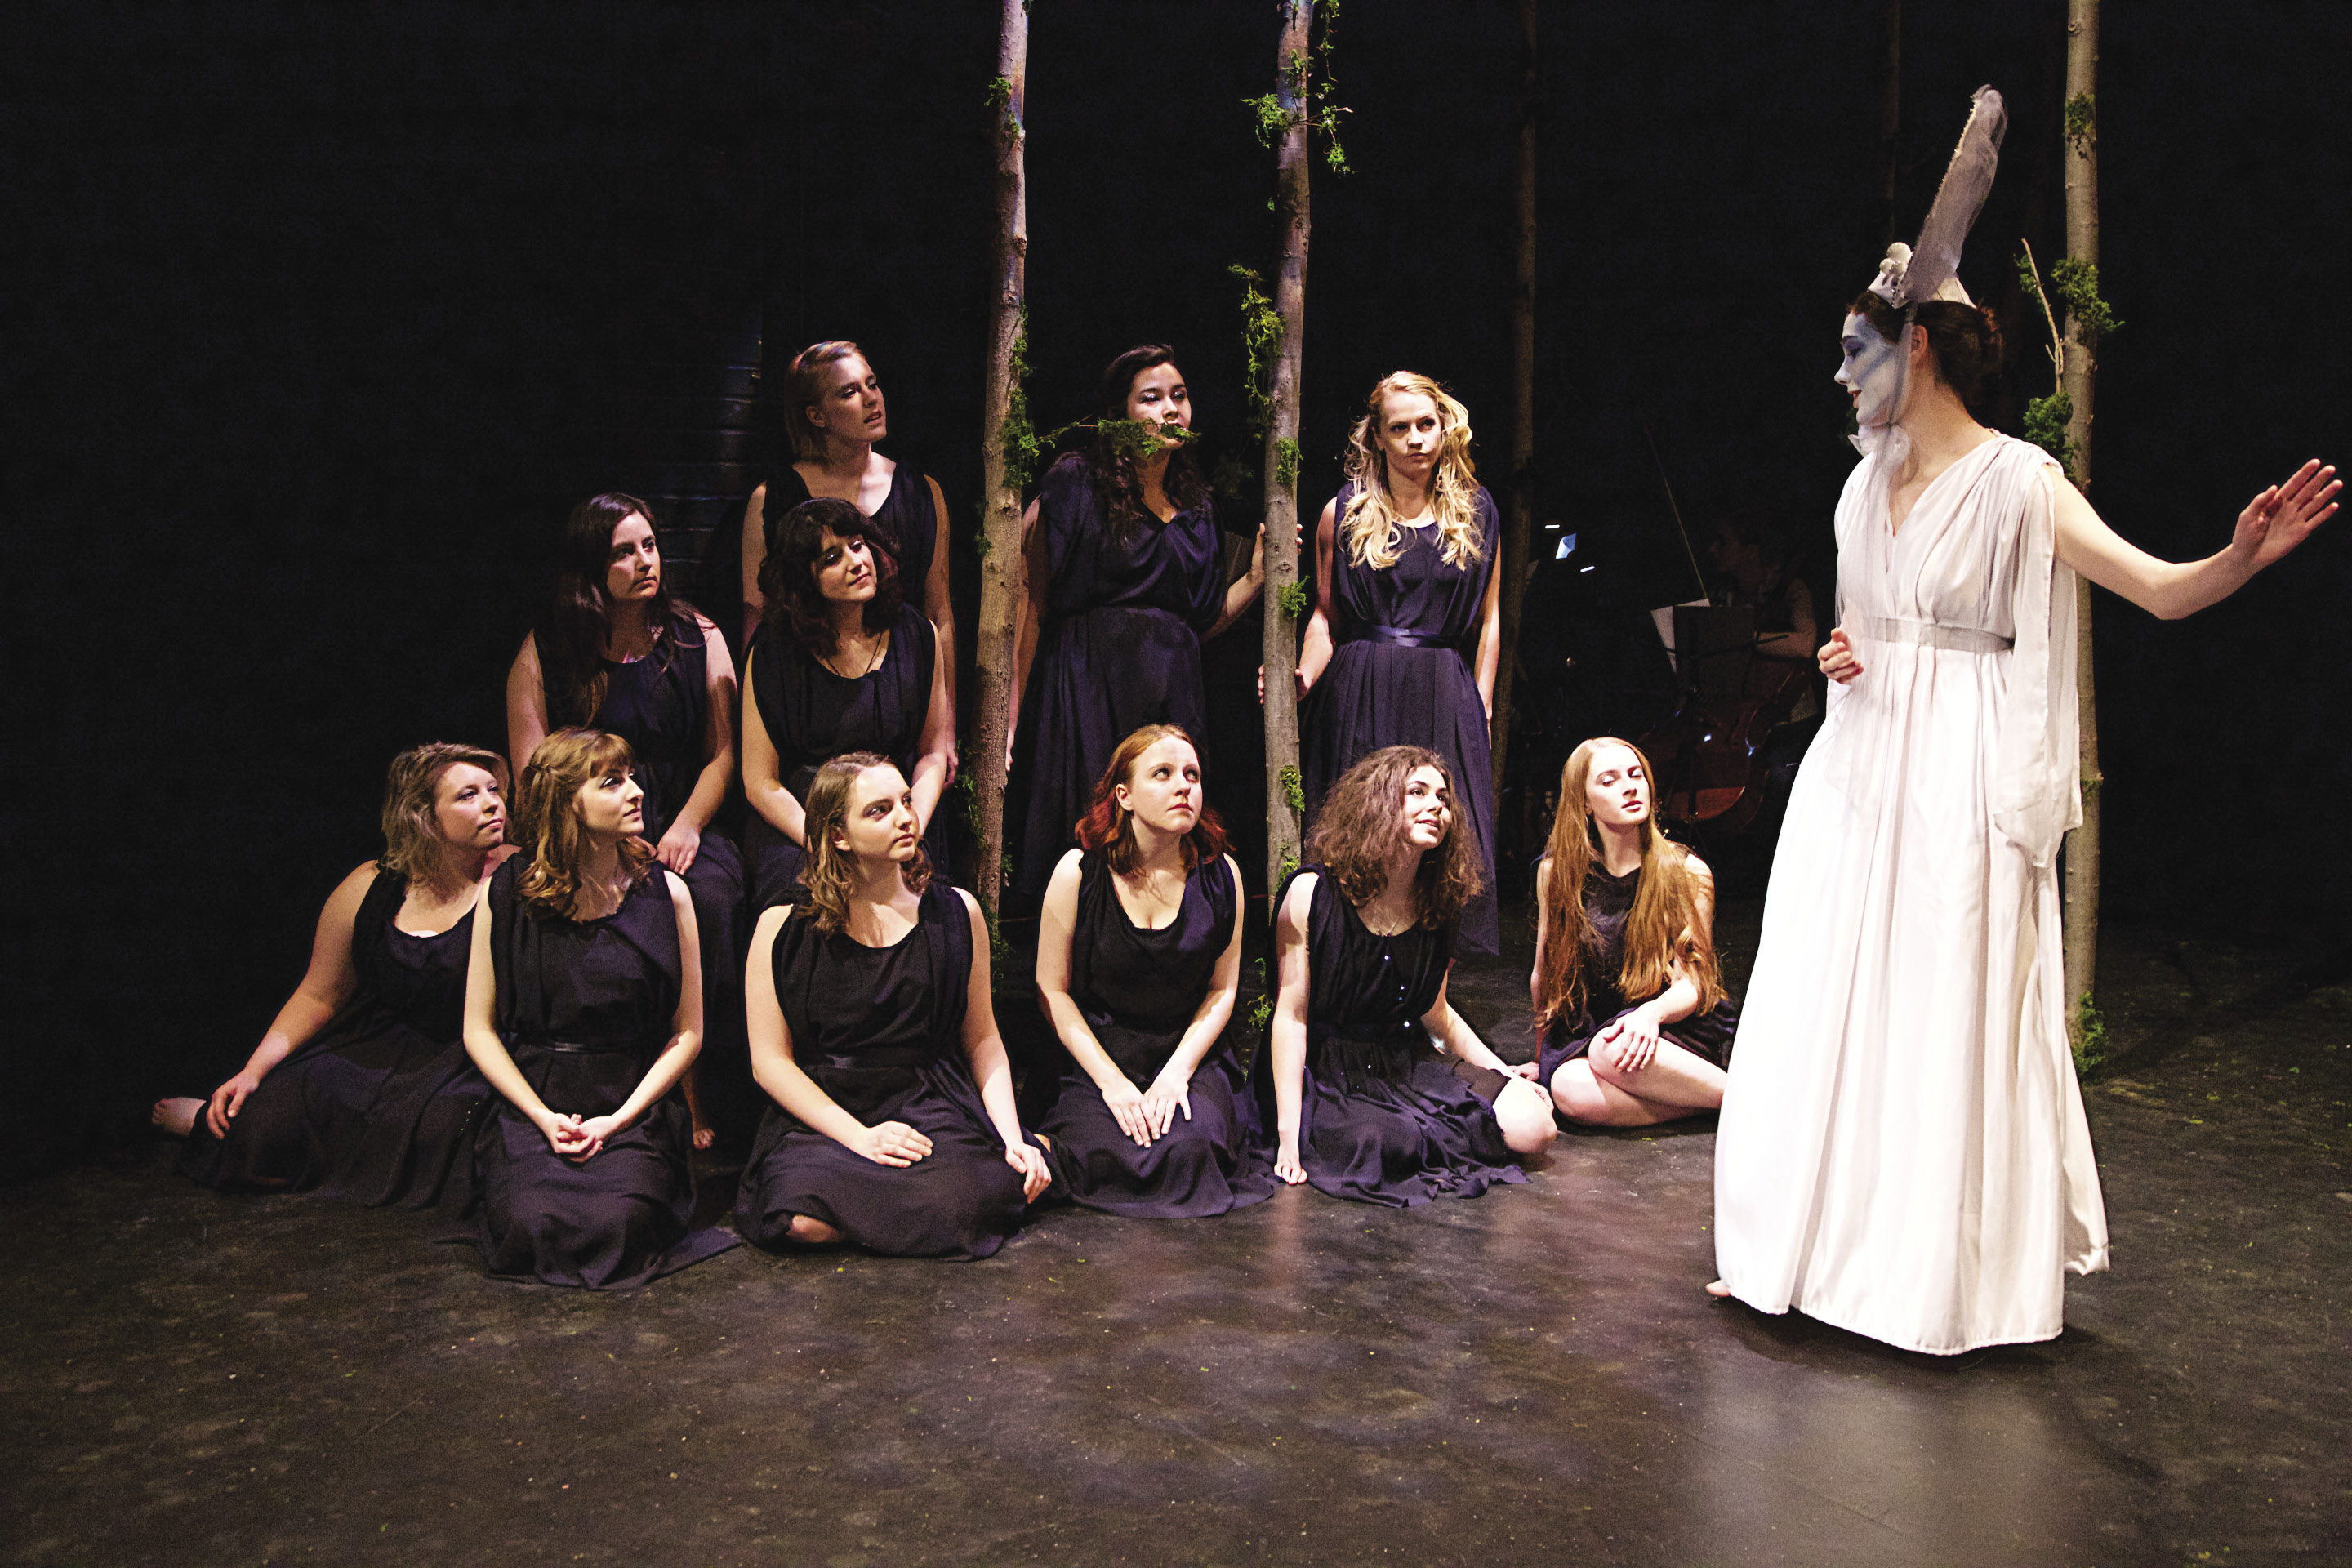 A woman in white walks past a group of women in black, kneeling on a stage